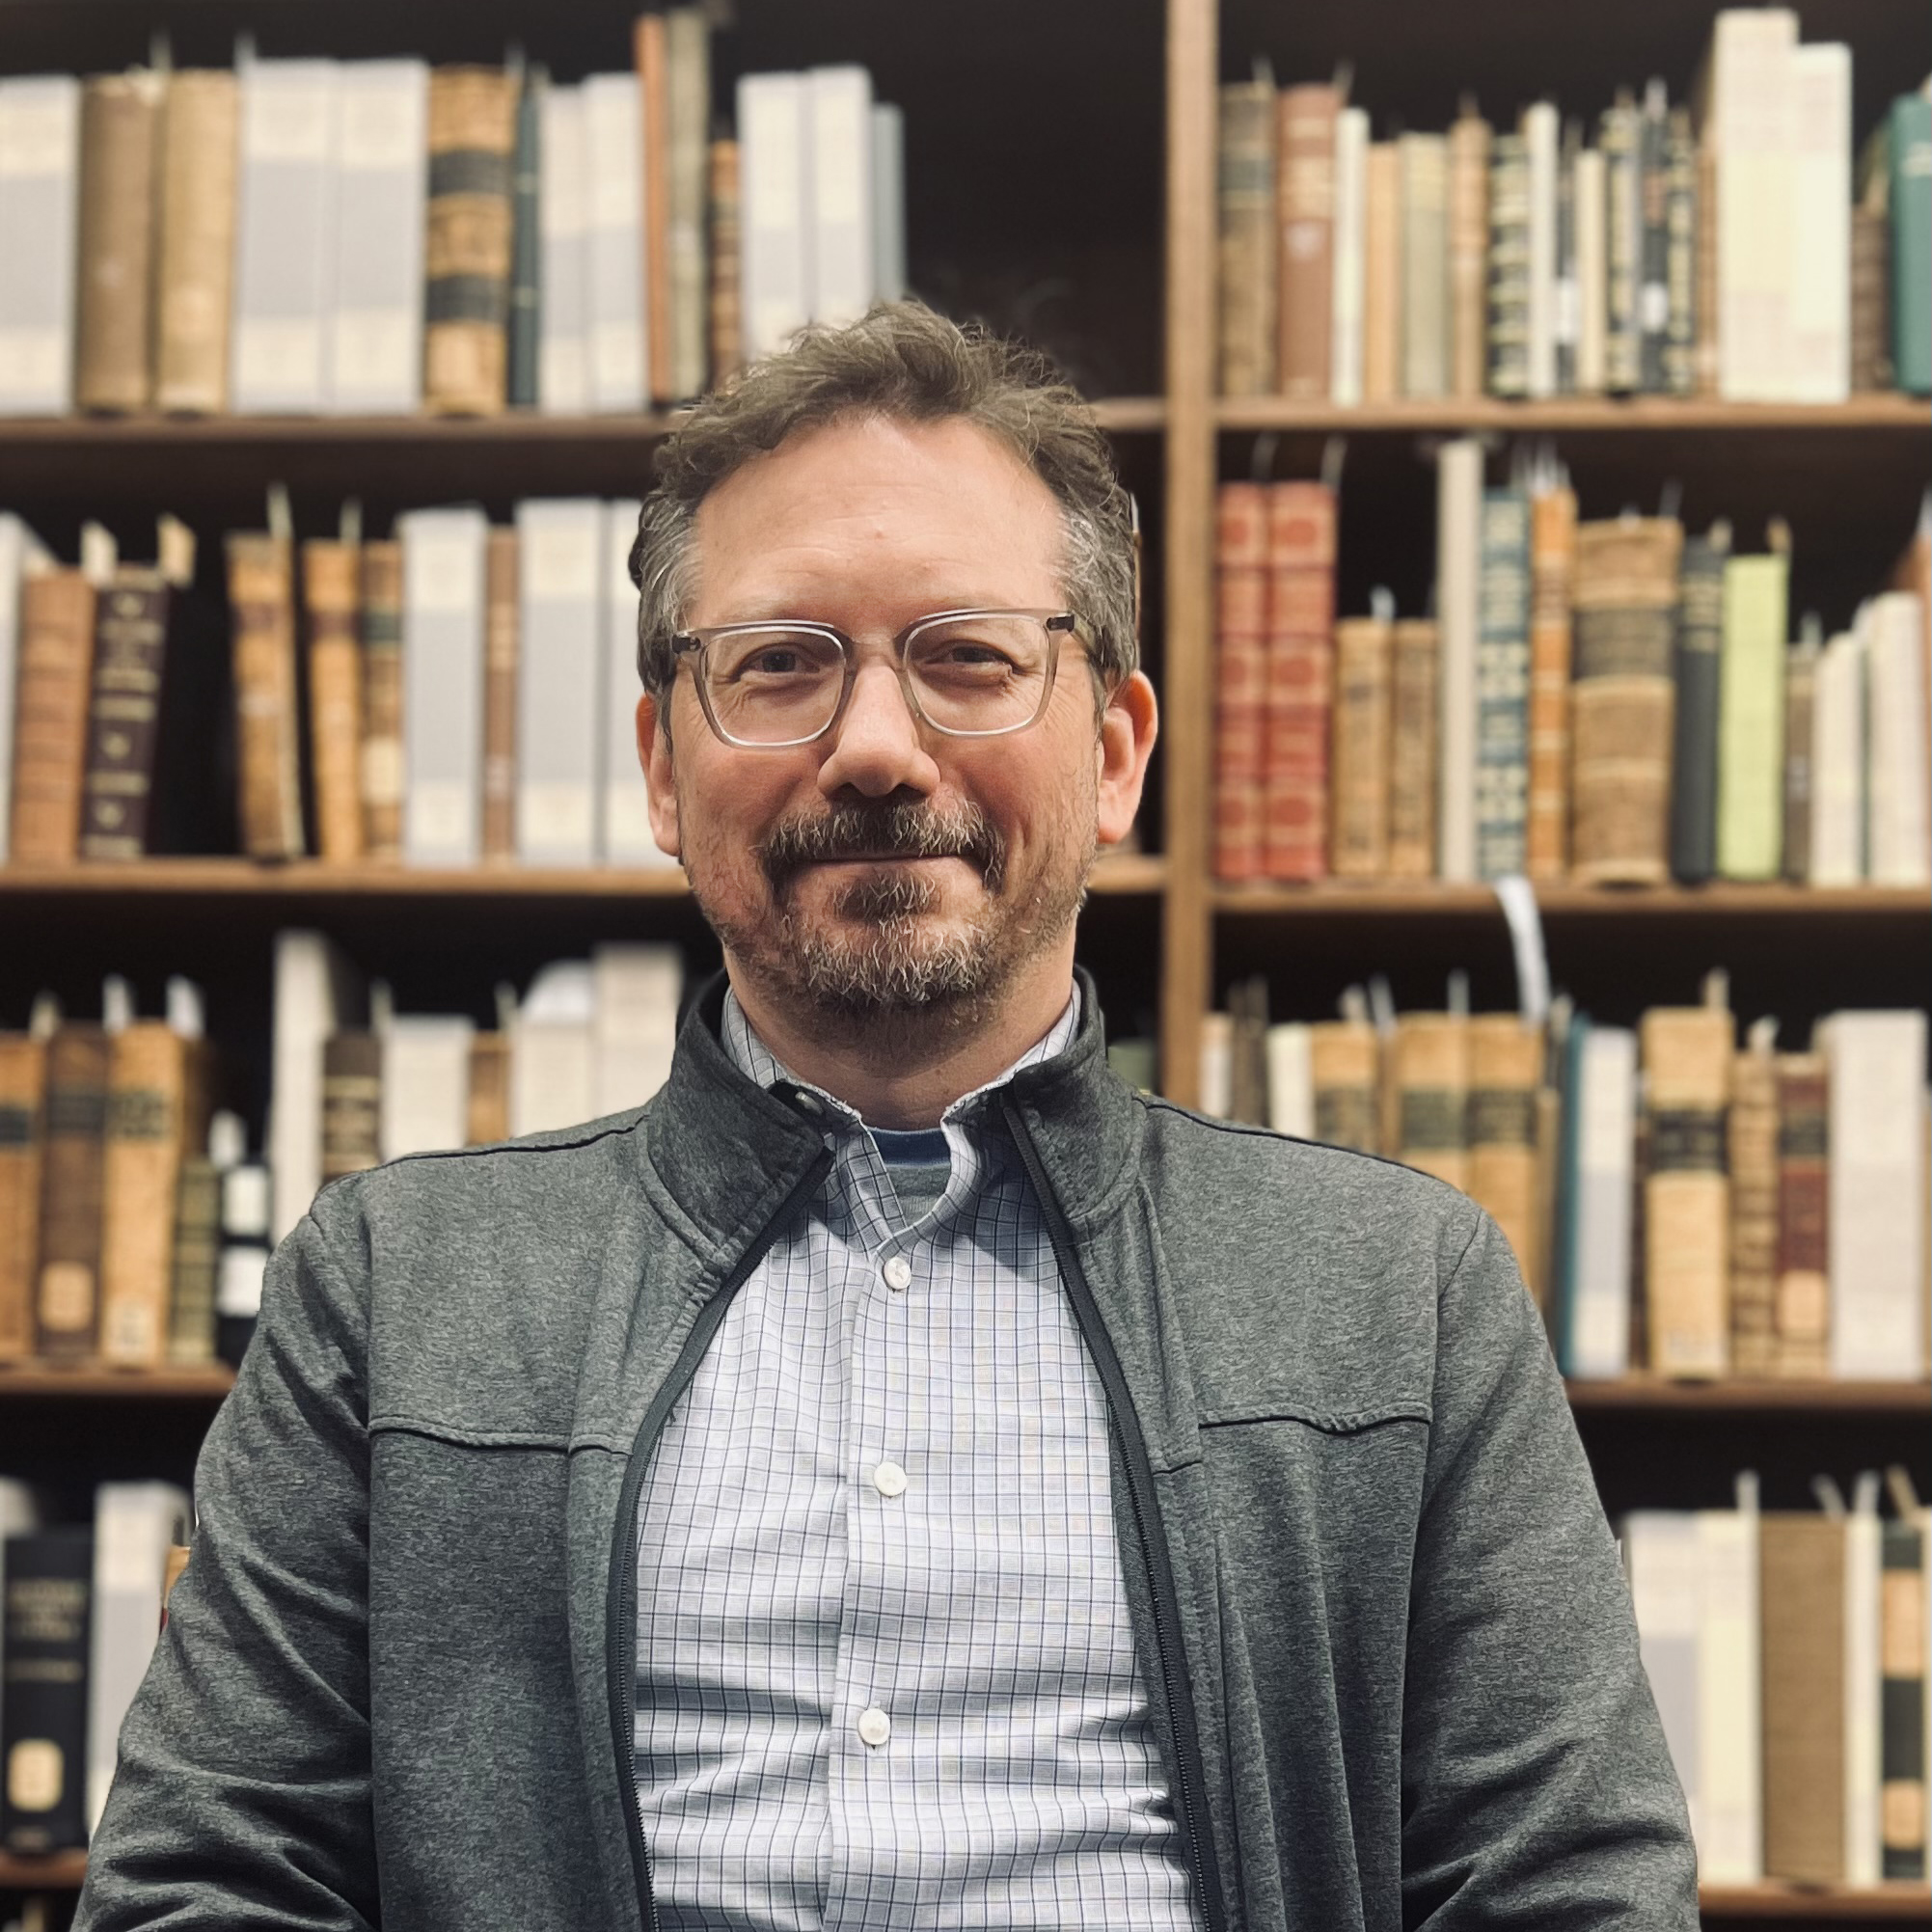 Damien Ihrig, white man in front of bookcases of rare books